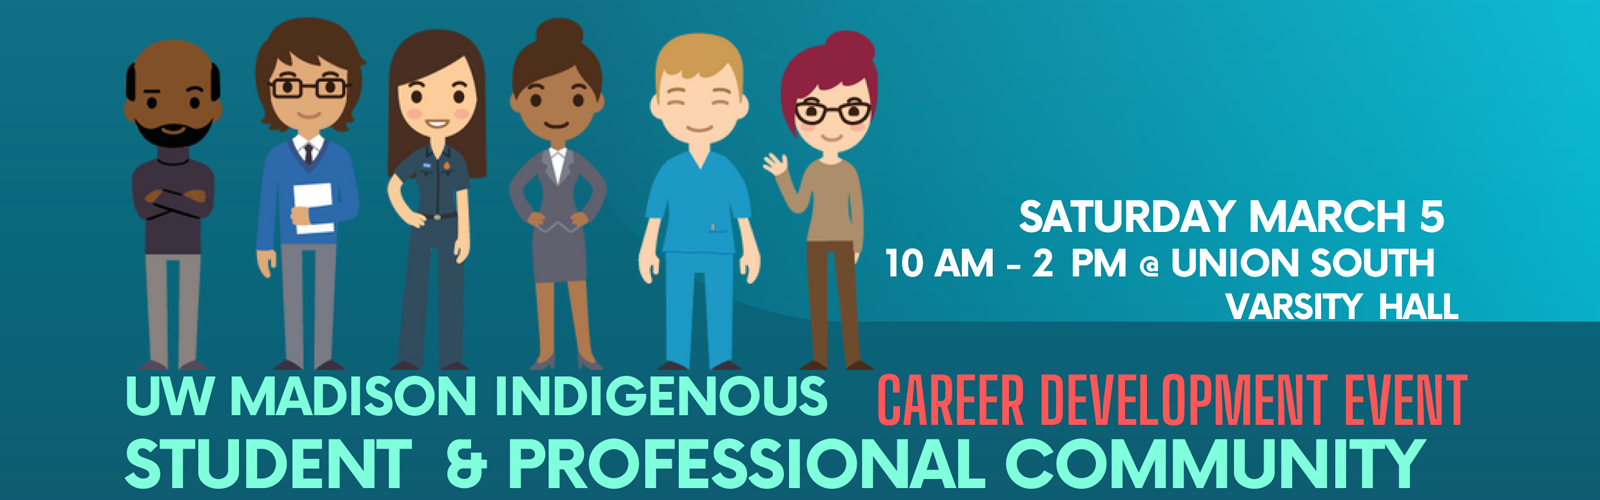 Banner with words and illustrations of a diverse group of people reading "UW–Madison Indigenous Student & Professional Community Career Development Event." Details in post.